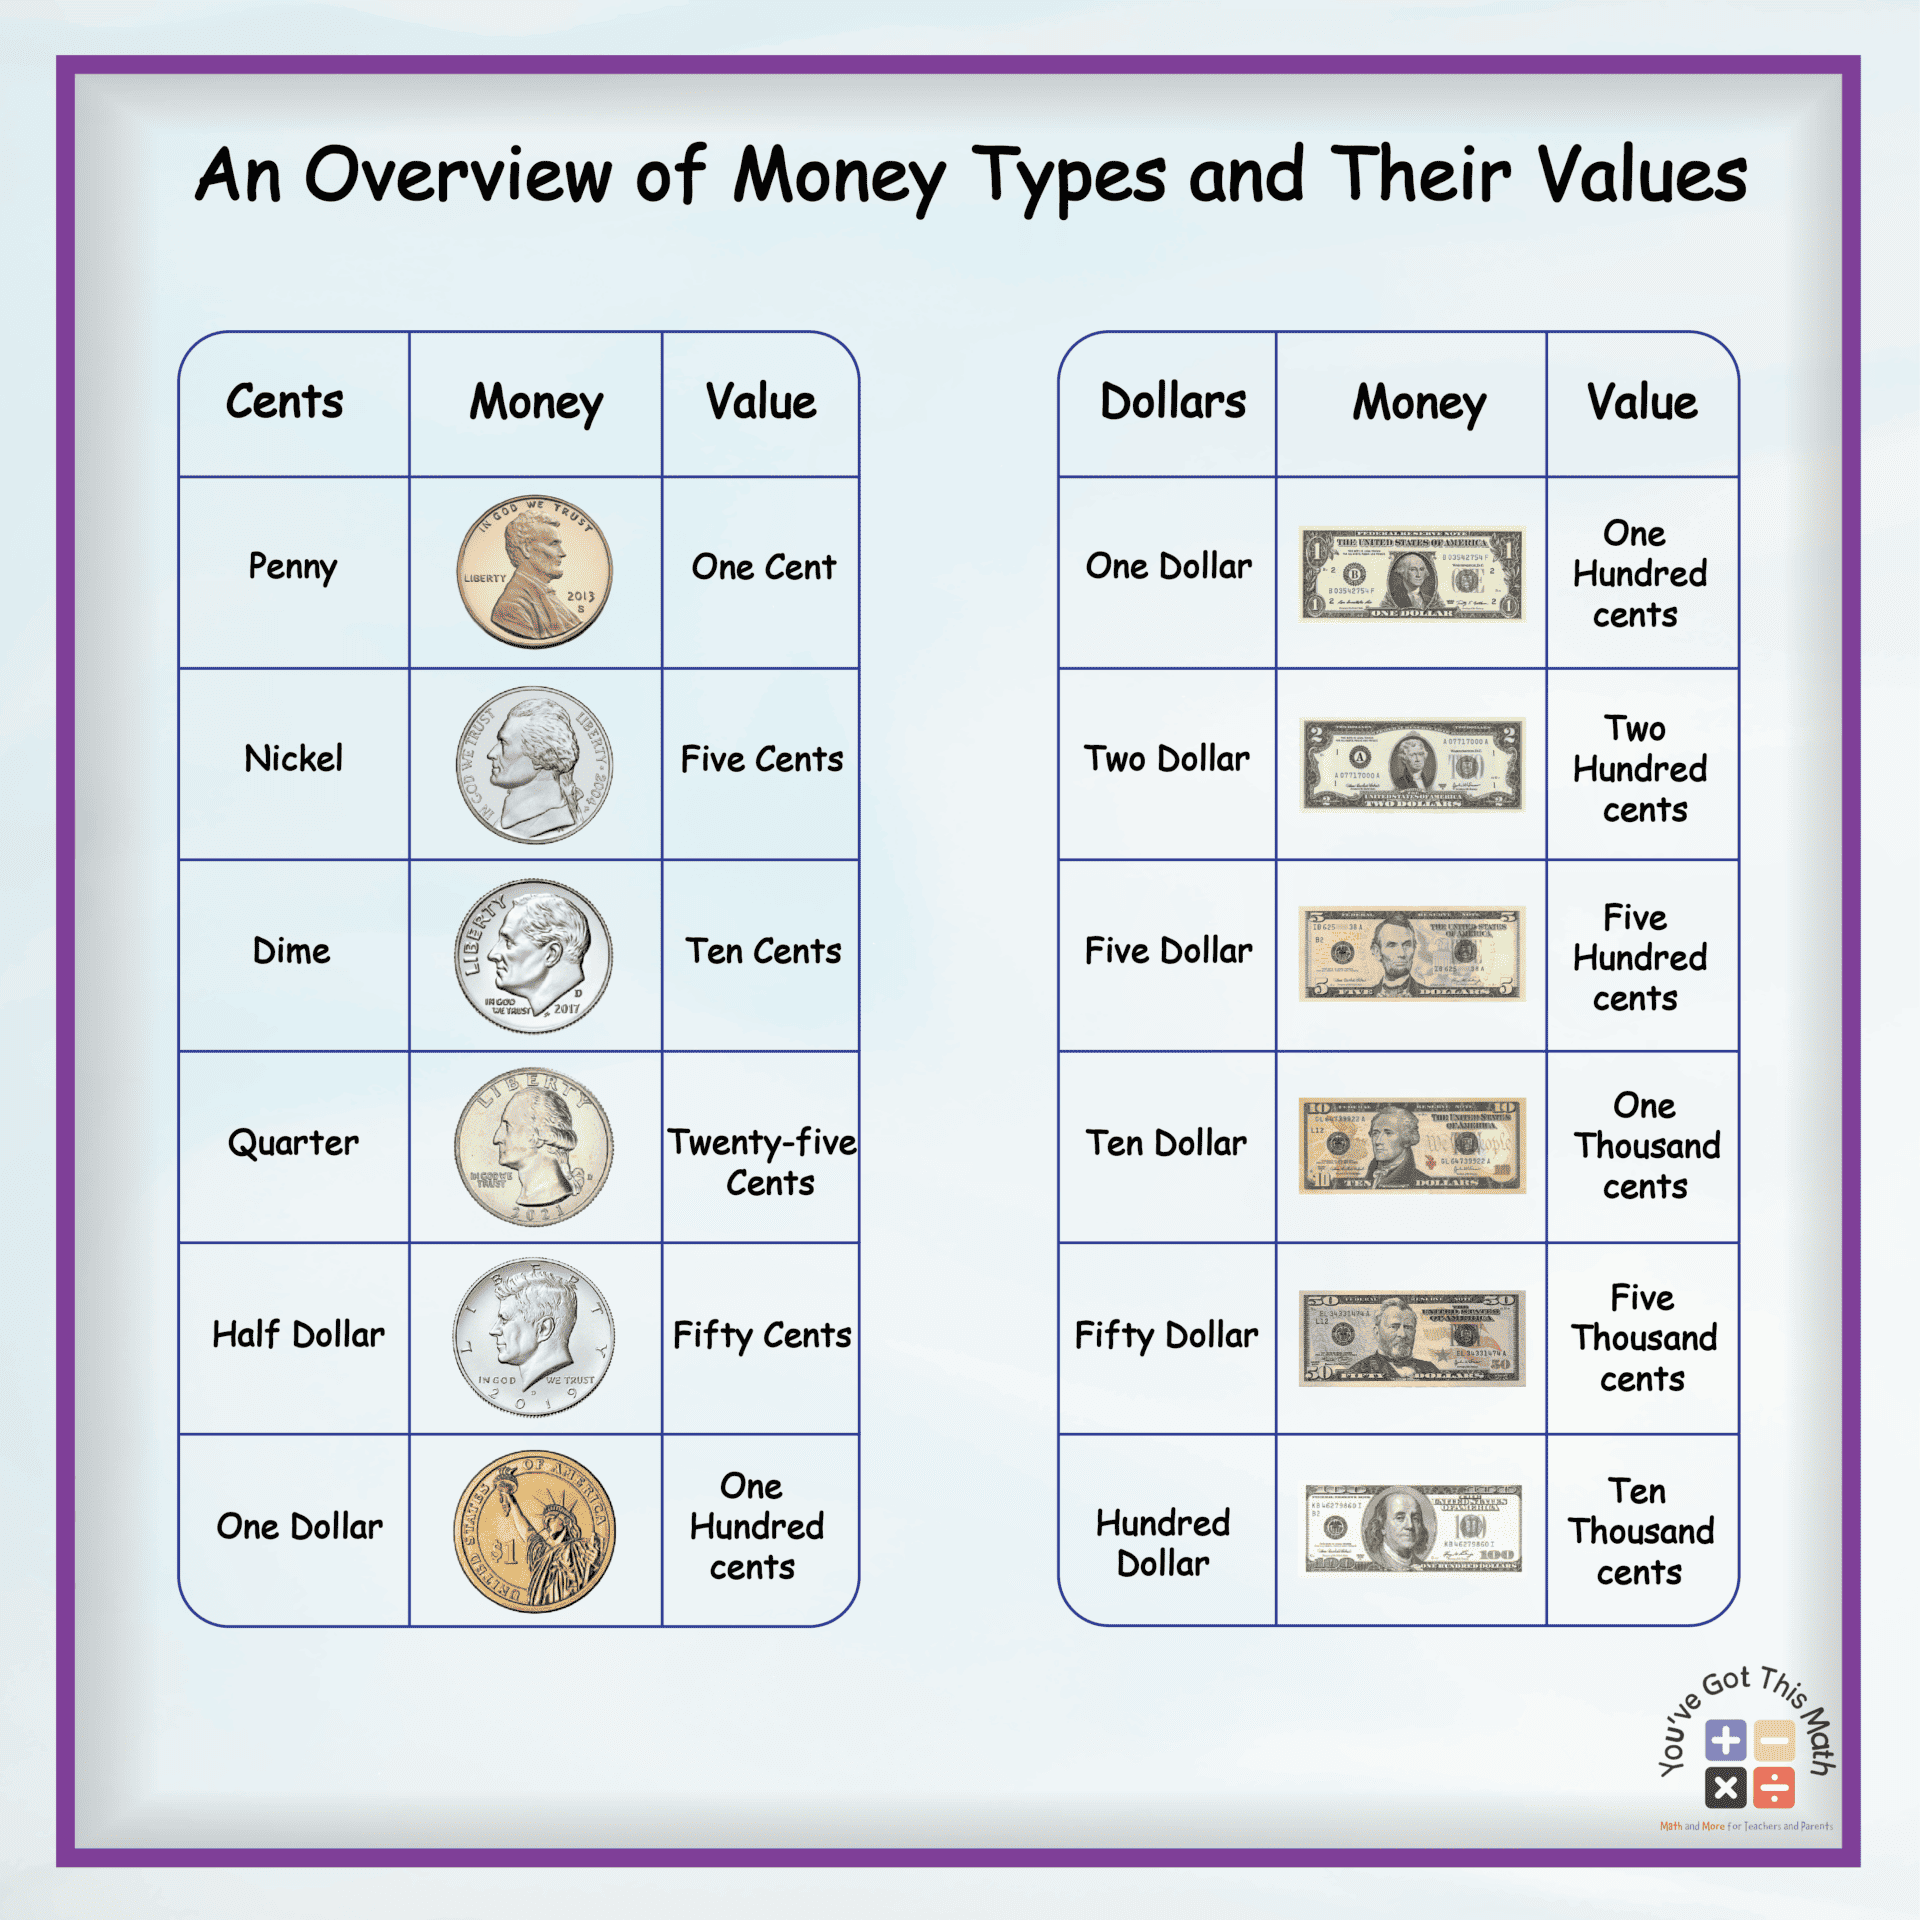 An Overview of Money Types and Their Values low